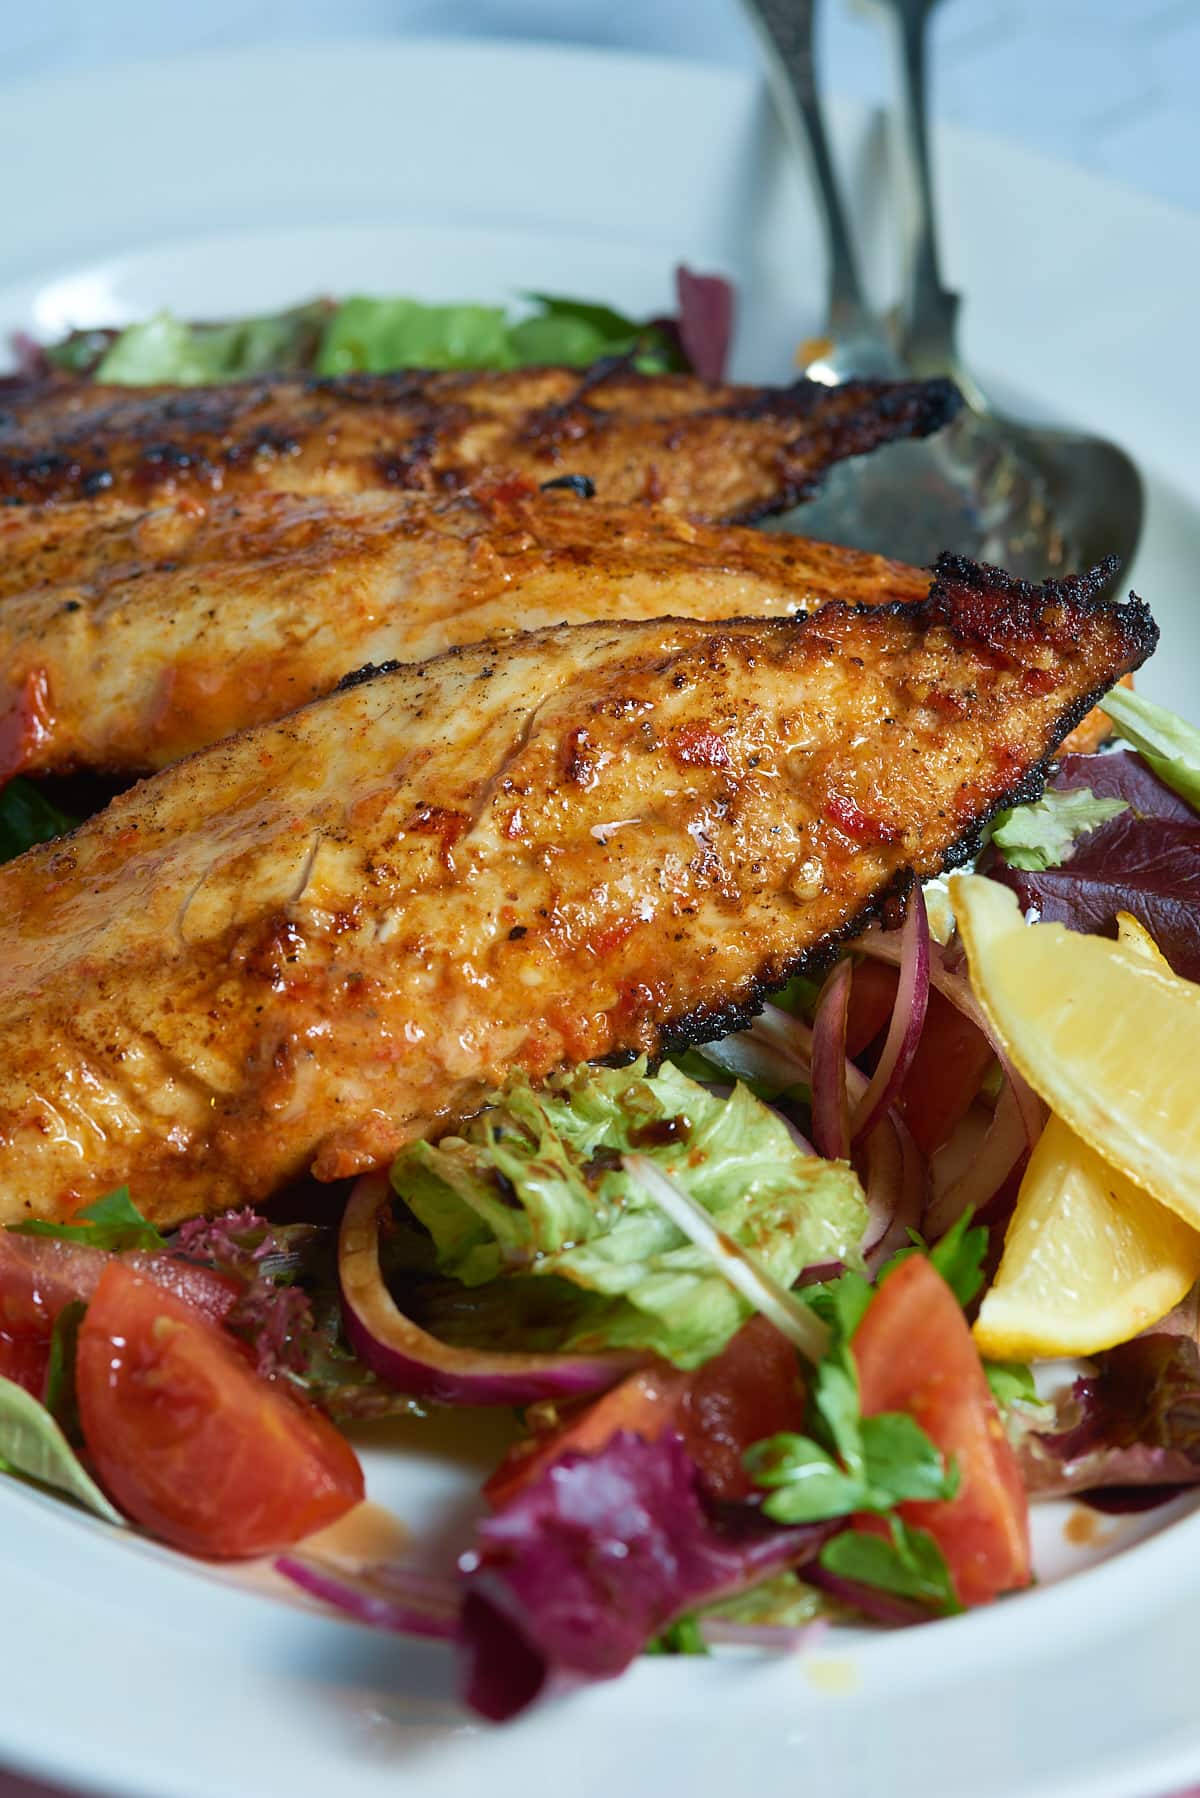 Pan fried mackerel with a devilled marinade and a tomato and red onion salad.